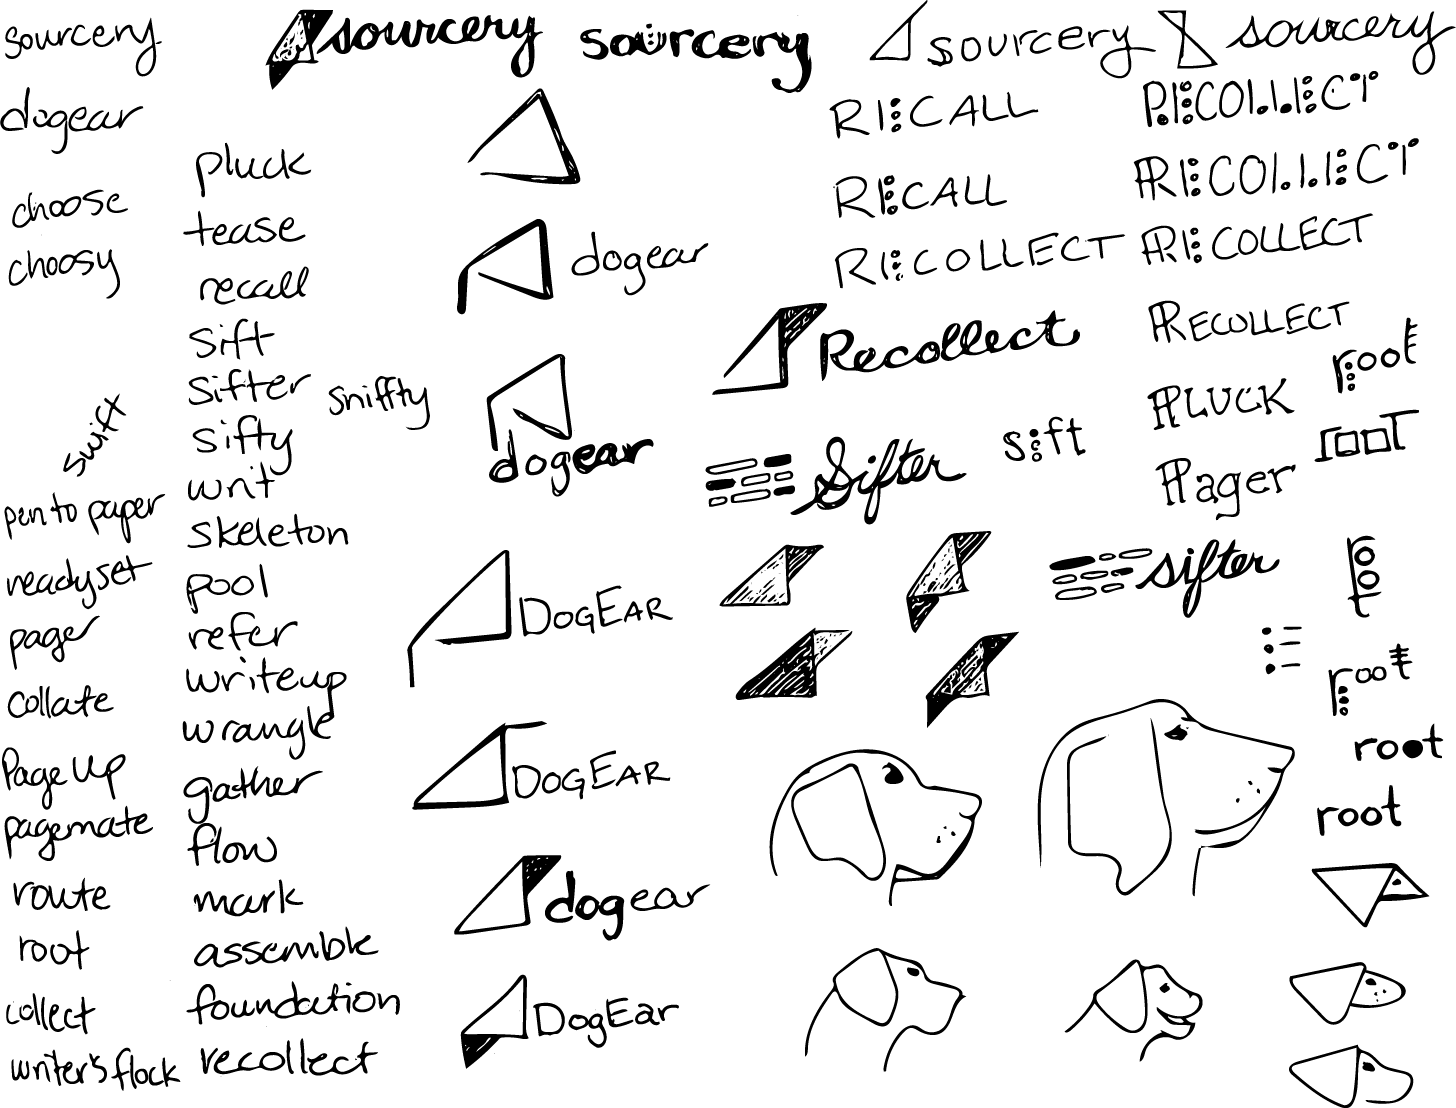 initial sketches of possible logos and names